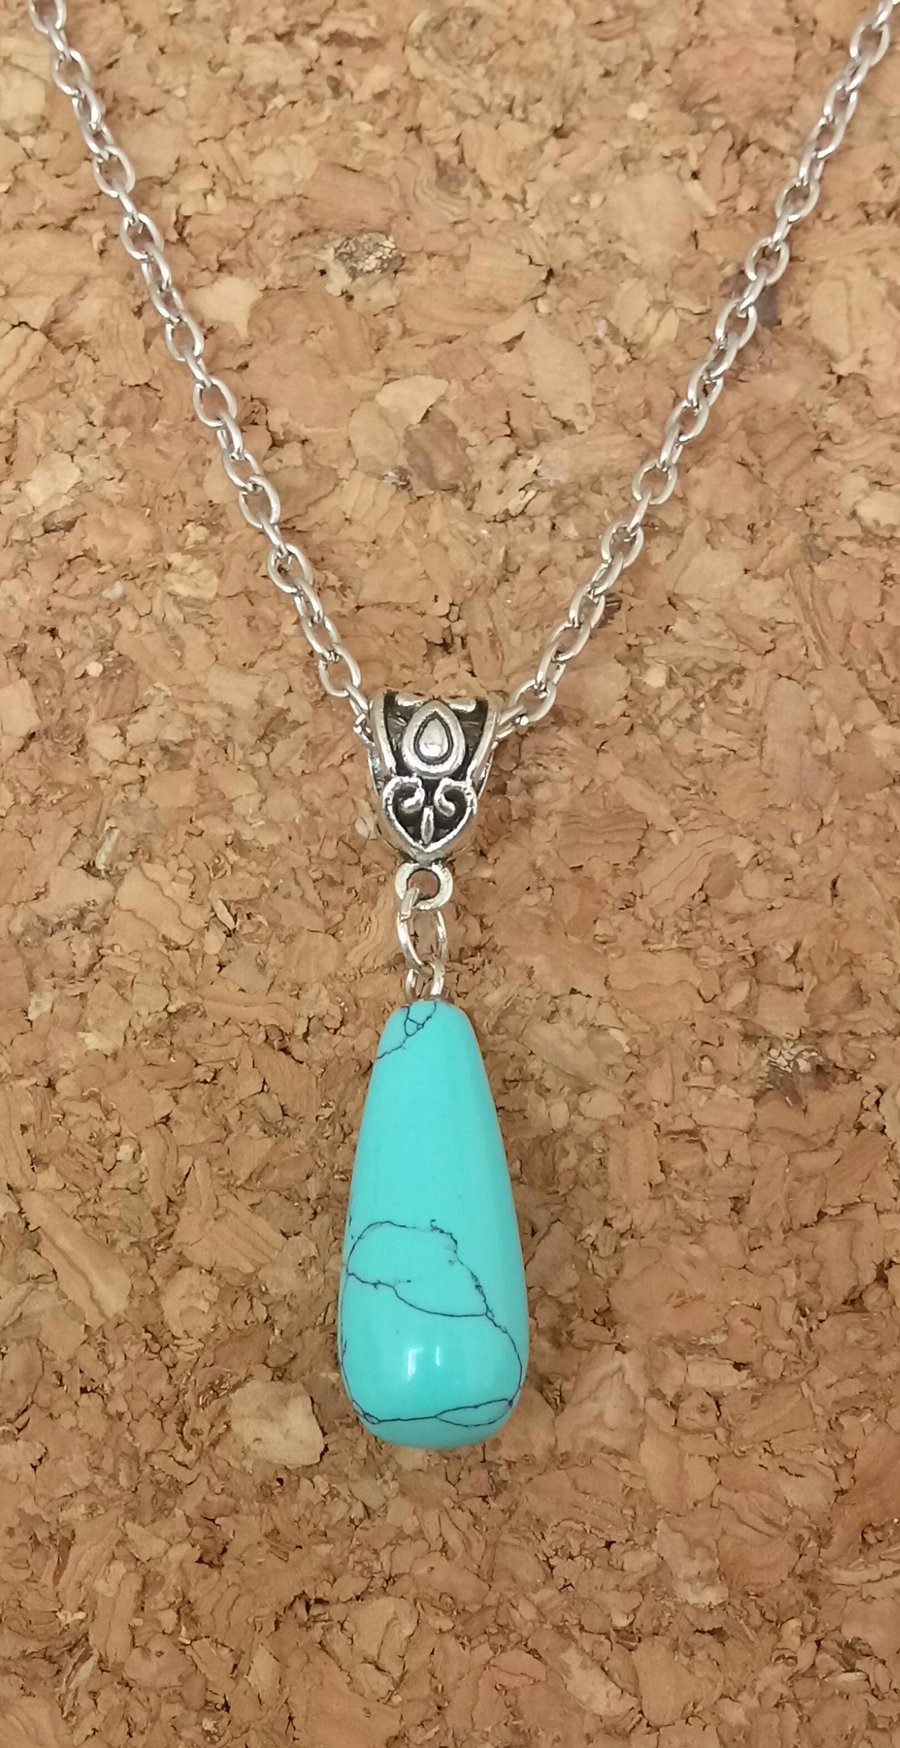 Beautiful Sterling Silver Necklace with Howlite Teardrop Stone Pendant